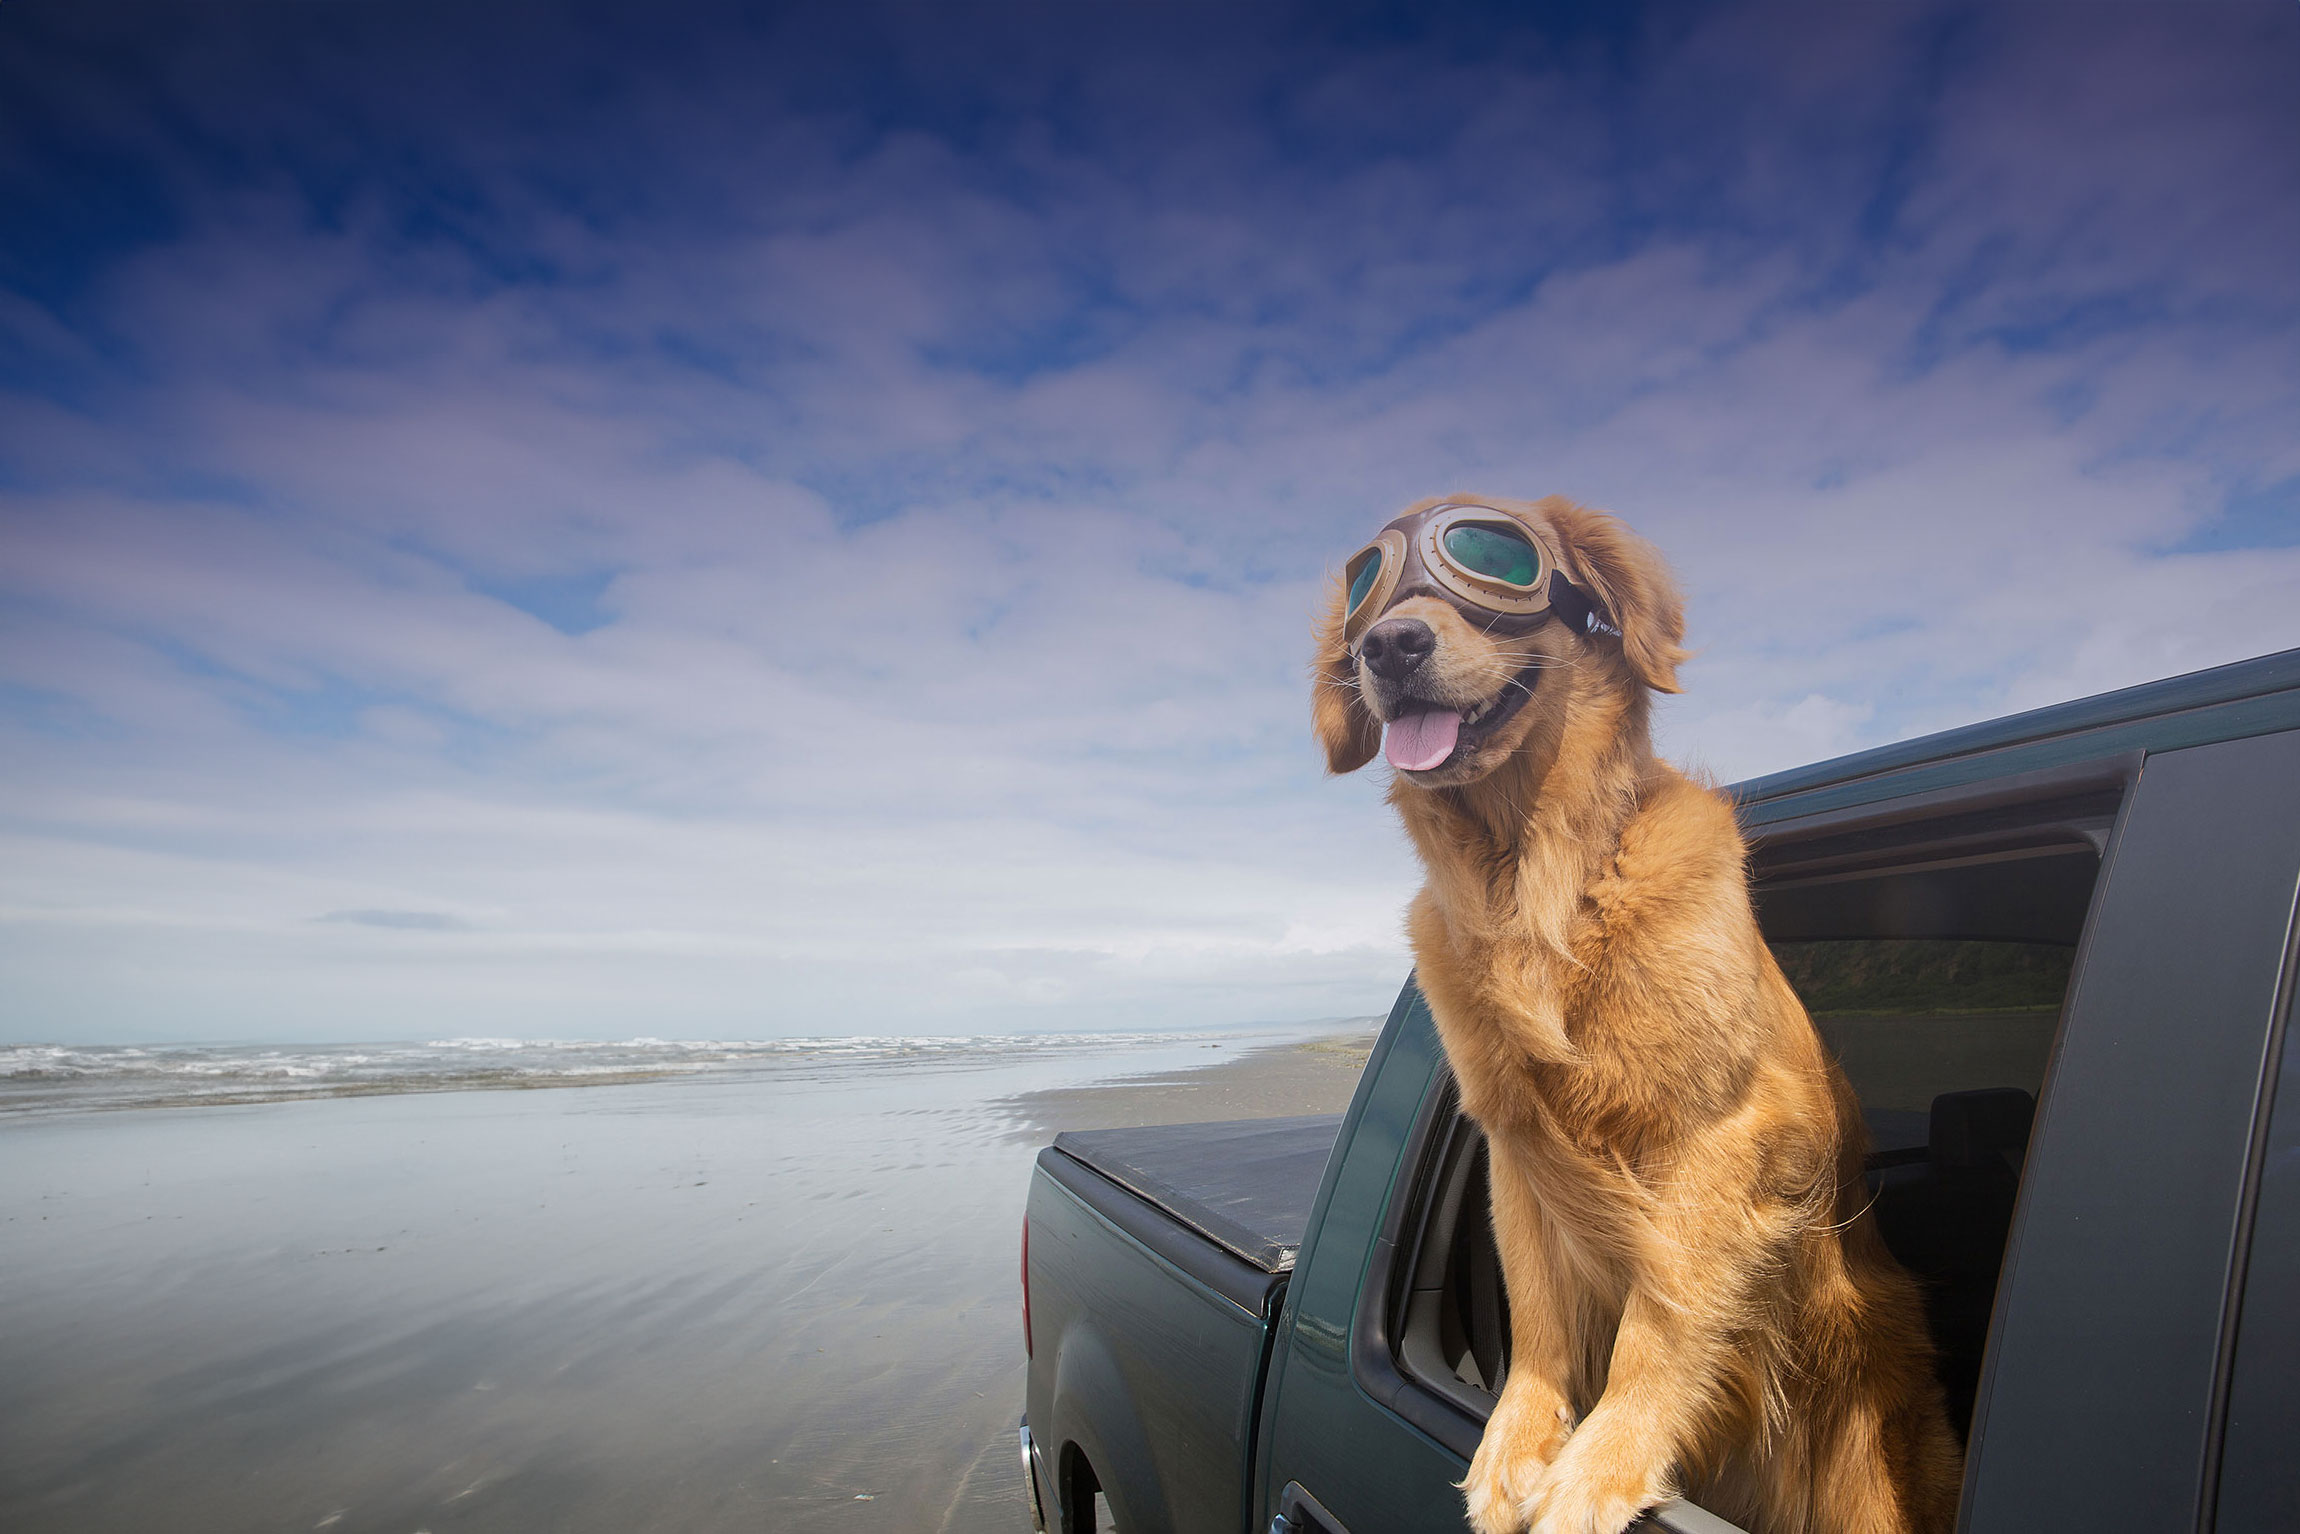 Dog wearing goggles leaning out of a car window